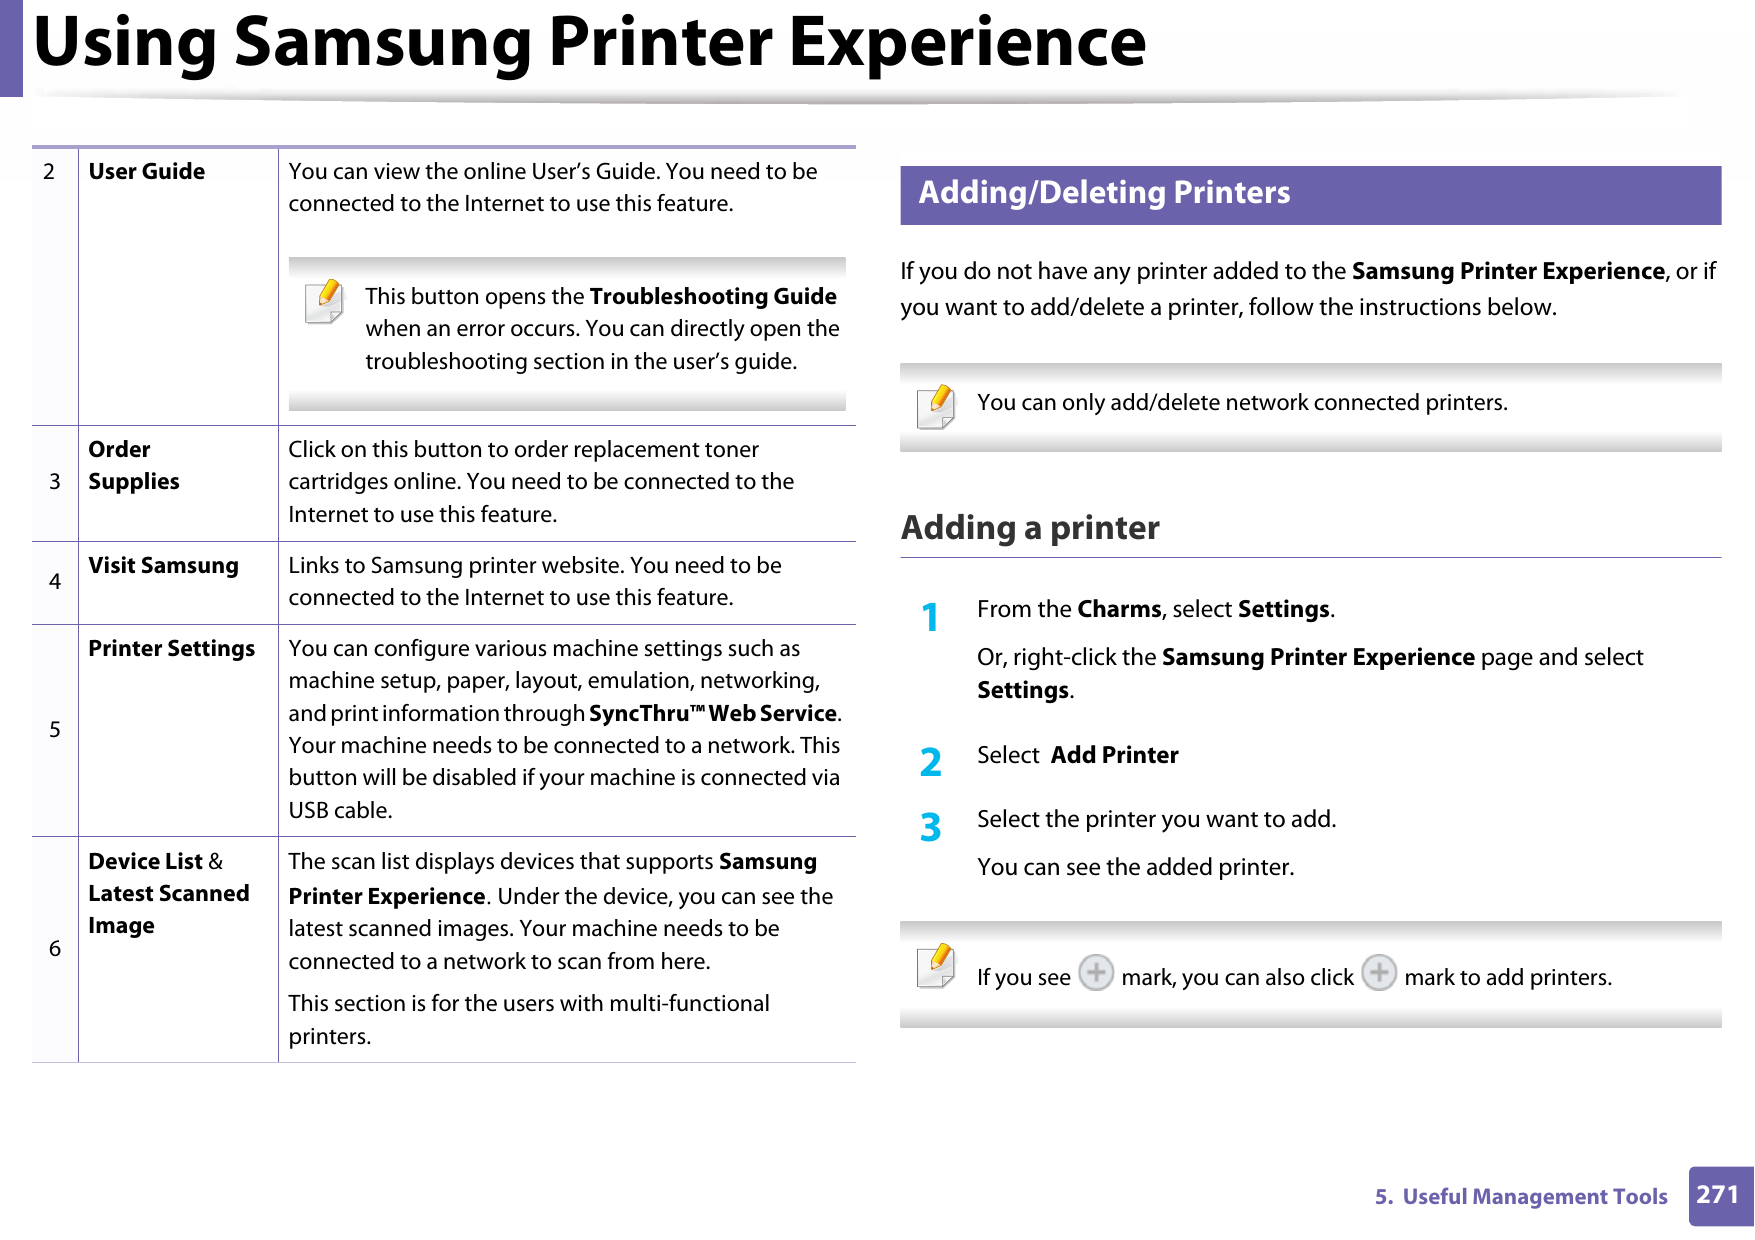 Using Samsung Printer Experience2715.  Useful Management Tools9 Adding/Deleting PrintersIf you do not have any printer added to the Samsung Printer Experience, or if you want to add/delete a printer, follow the instructions below.  You can only add/delete network connected printers. Adding a printer1From the Charms, select Settings.Or, right-click the Samsung Printer Experience page and select Settings.2  Select  Add Printer3  Select the printer you want to add.You can see the added printer. If you see   mark, you can also click   mark to add printers. 2User Guide You can view the online User’s Guide. You need to be connected to the Internet to use this feature. This button opens the Troubleshooting Guide when an error occurs. You can directly open the troubleshooting section in the user’s guide.  3Order SuppliesClick on this button to order replacement toner cartridges online. You need to be connected to the Internet to use this feature. 4Visit Samsung Links to Samsung printer website. You need to be connected to the Internet to use this feature.5Printer Settings You can configure various machine settings such as machine setup, paper, layout, emulation, networking, and print information through SyncThru™ Web Service. Your machine needs to be connected to a network. This button will be disabled if your machine is connected via USB cable.6Device List &amp; Latest Scanned ImageThe scan list displays devices that supports Samsung Printer Experience. Under the device, you can see the latest scanned images. Your machine needs to be connected to a network to scan from here. This section is for the users with multi-functional printers.